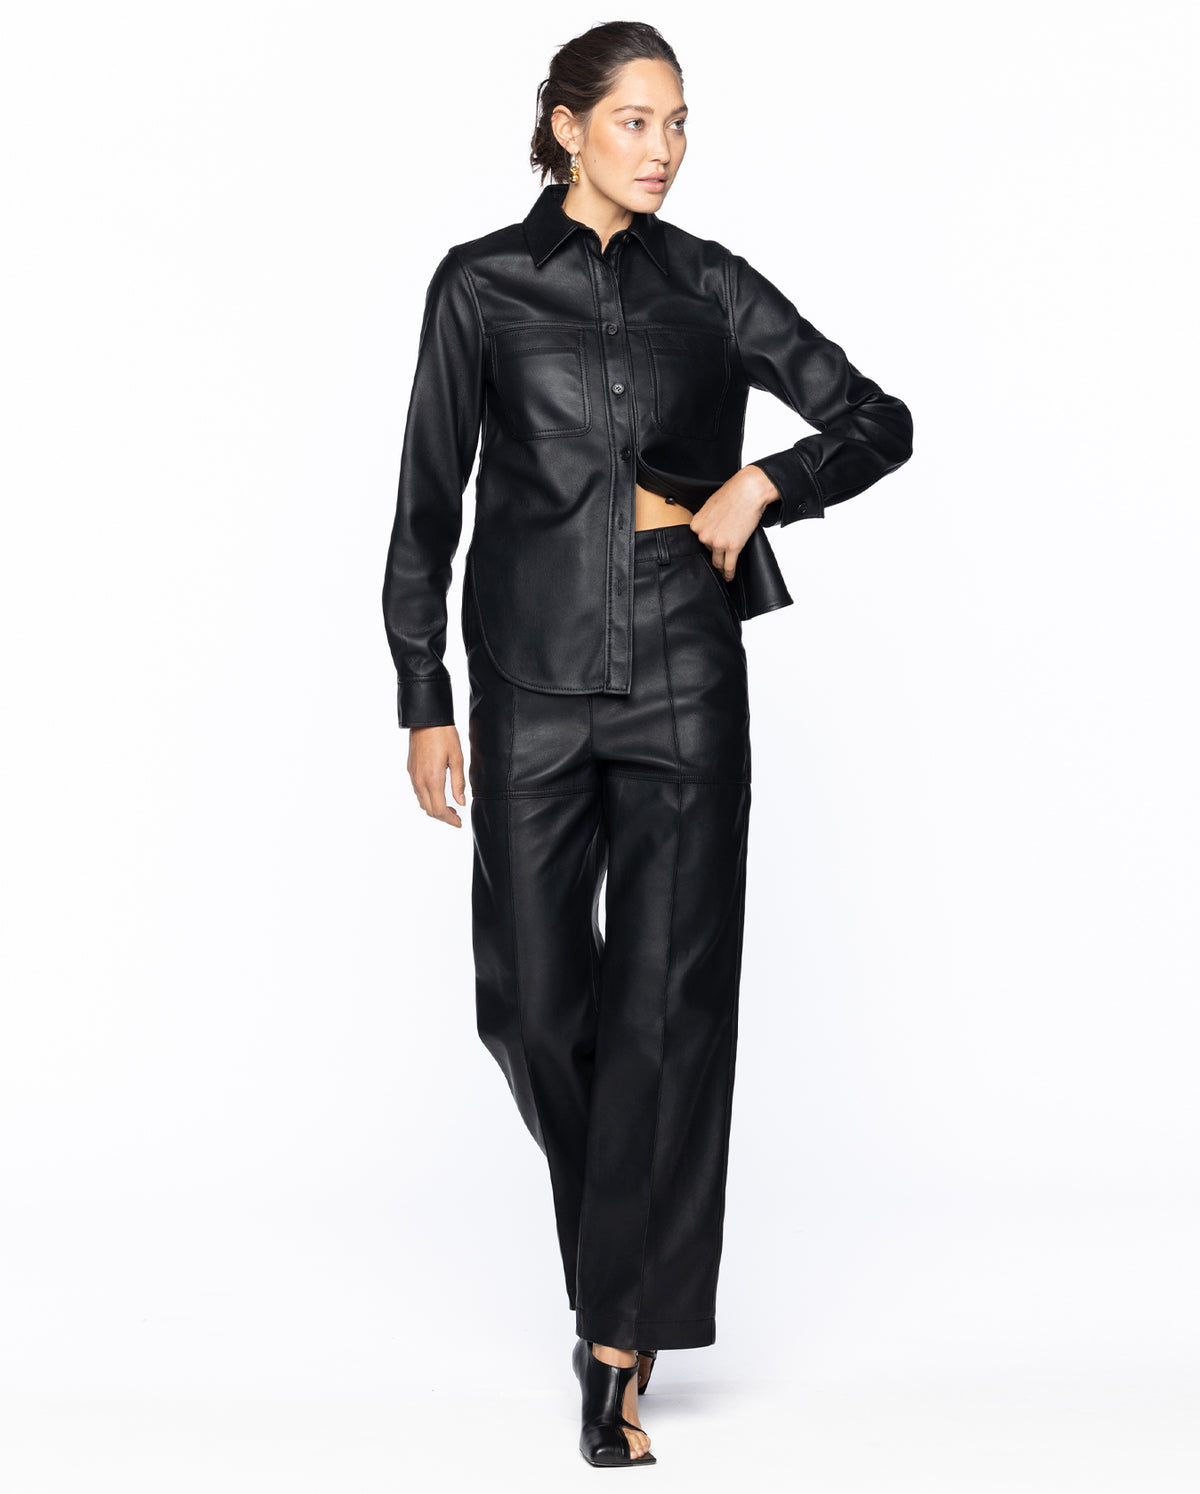 Faux Leather Straight Fit Pants - Black